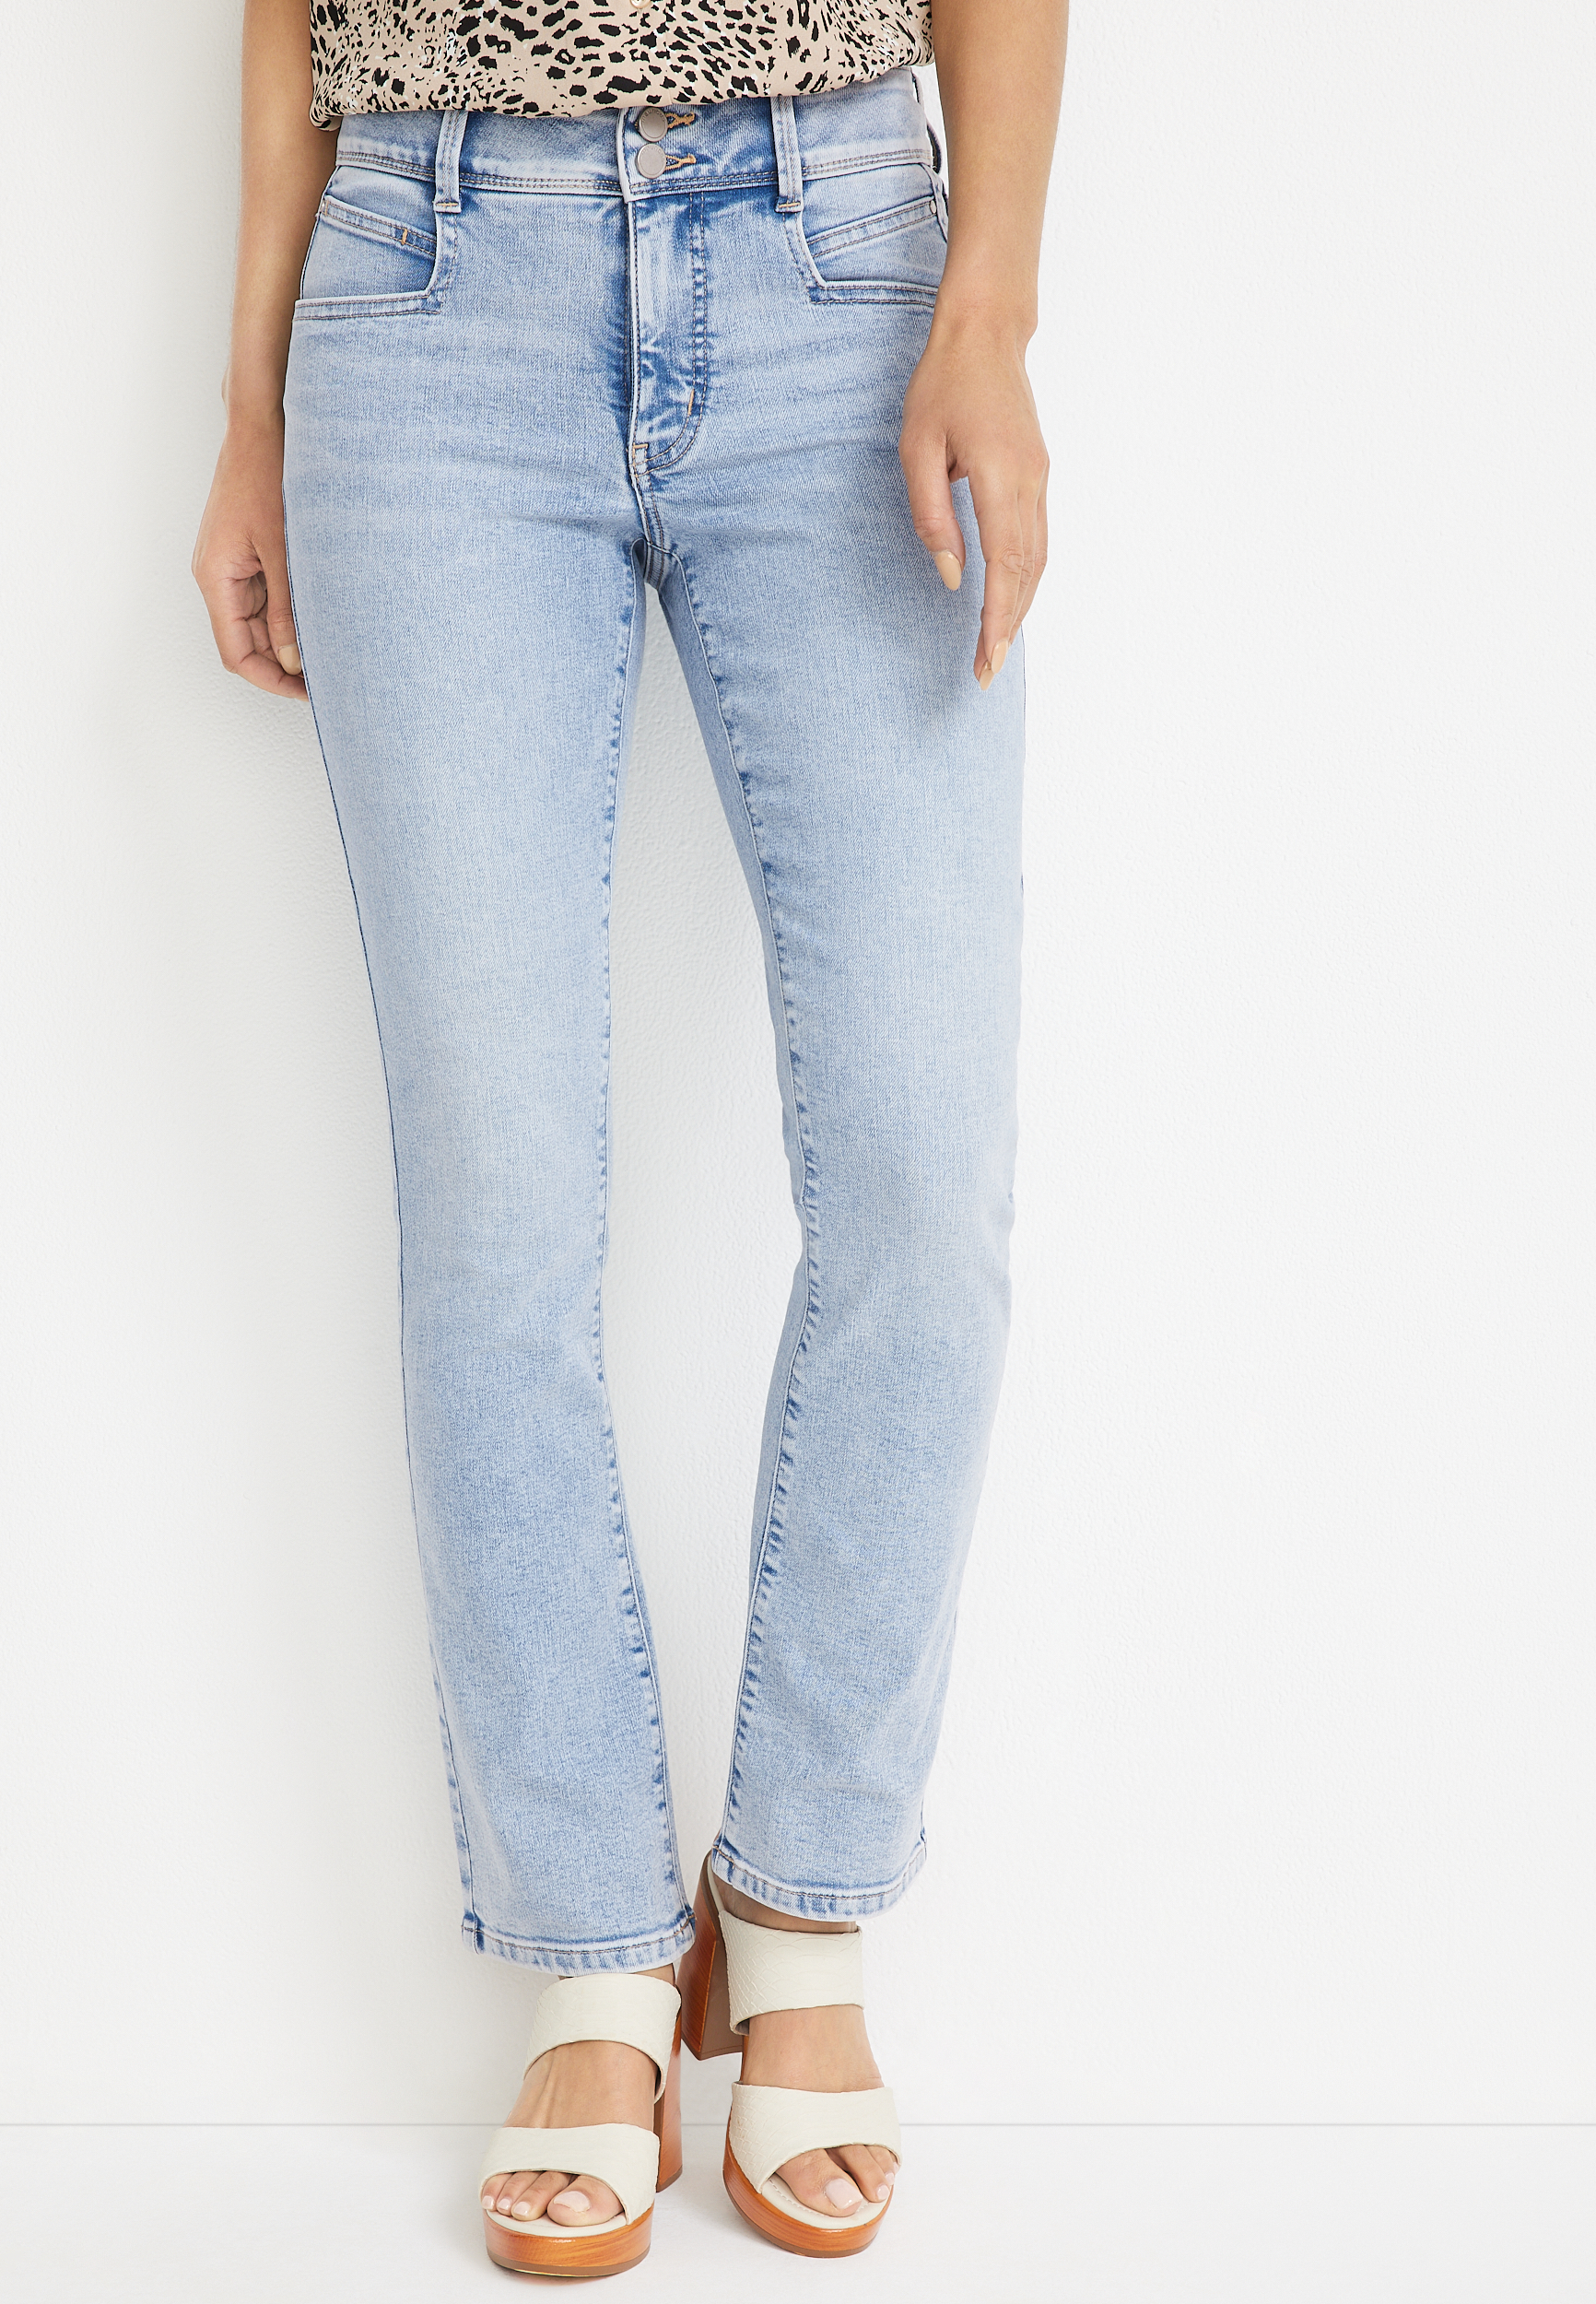 m jeans by maurices™ Everflex™ Slim Boot High Rise Double Button Jean ...